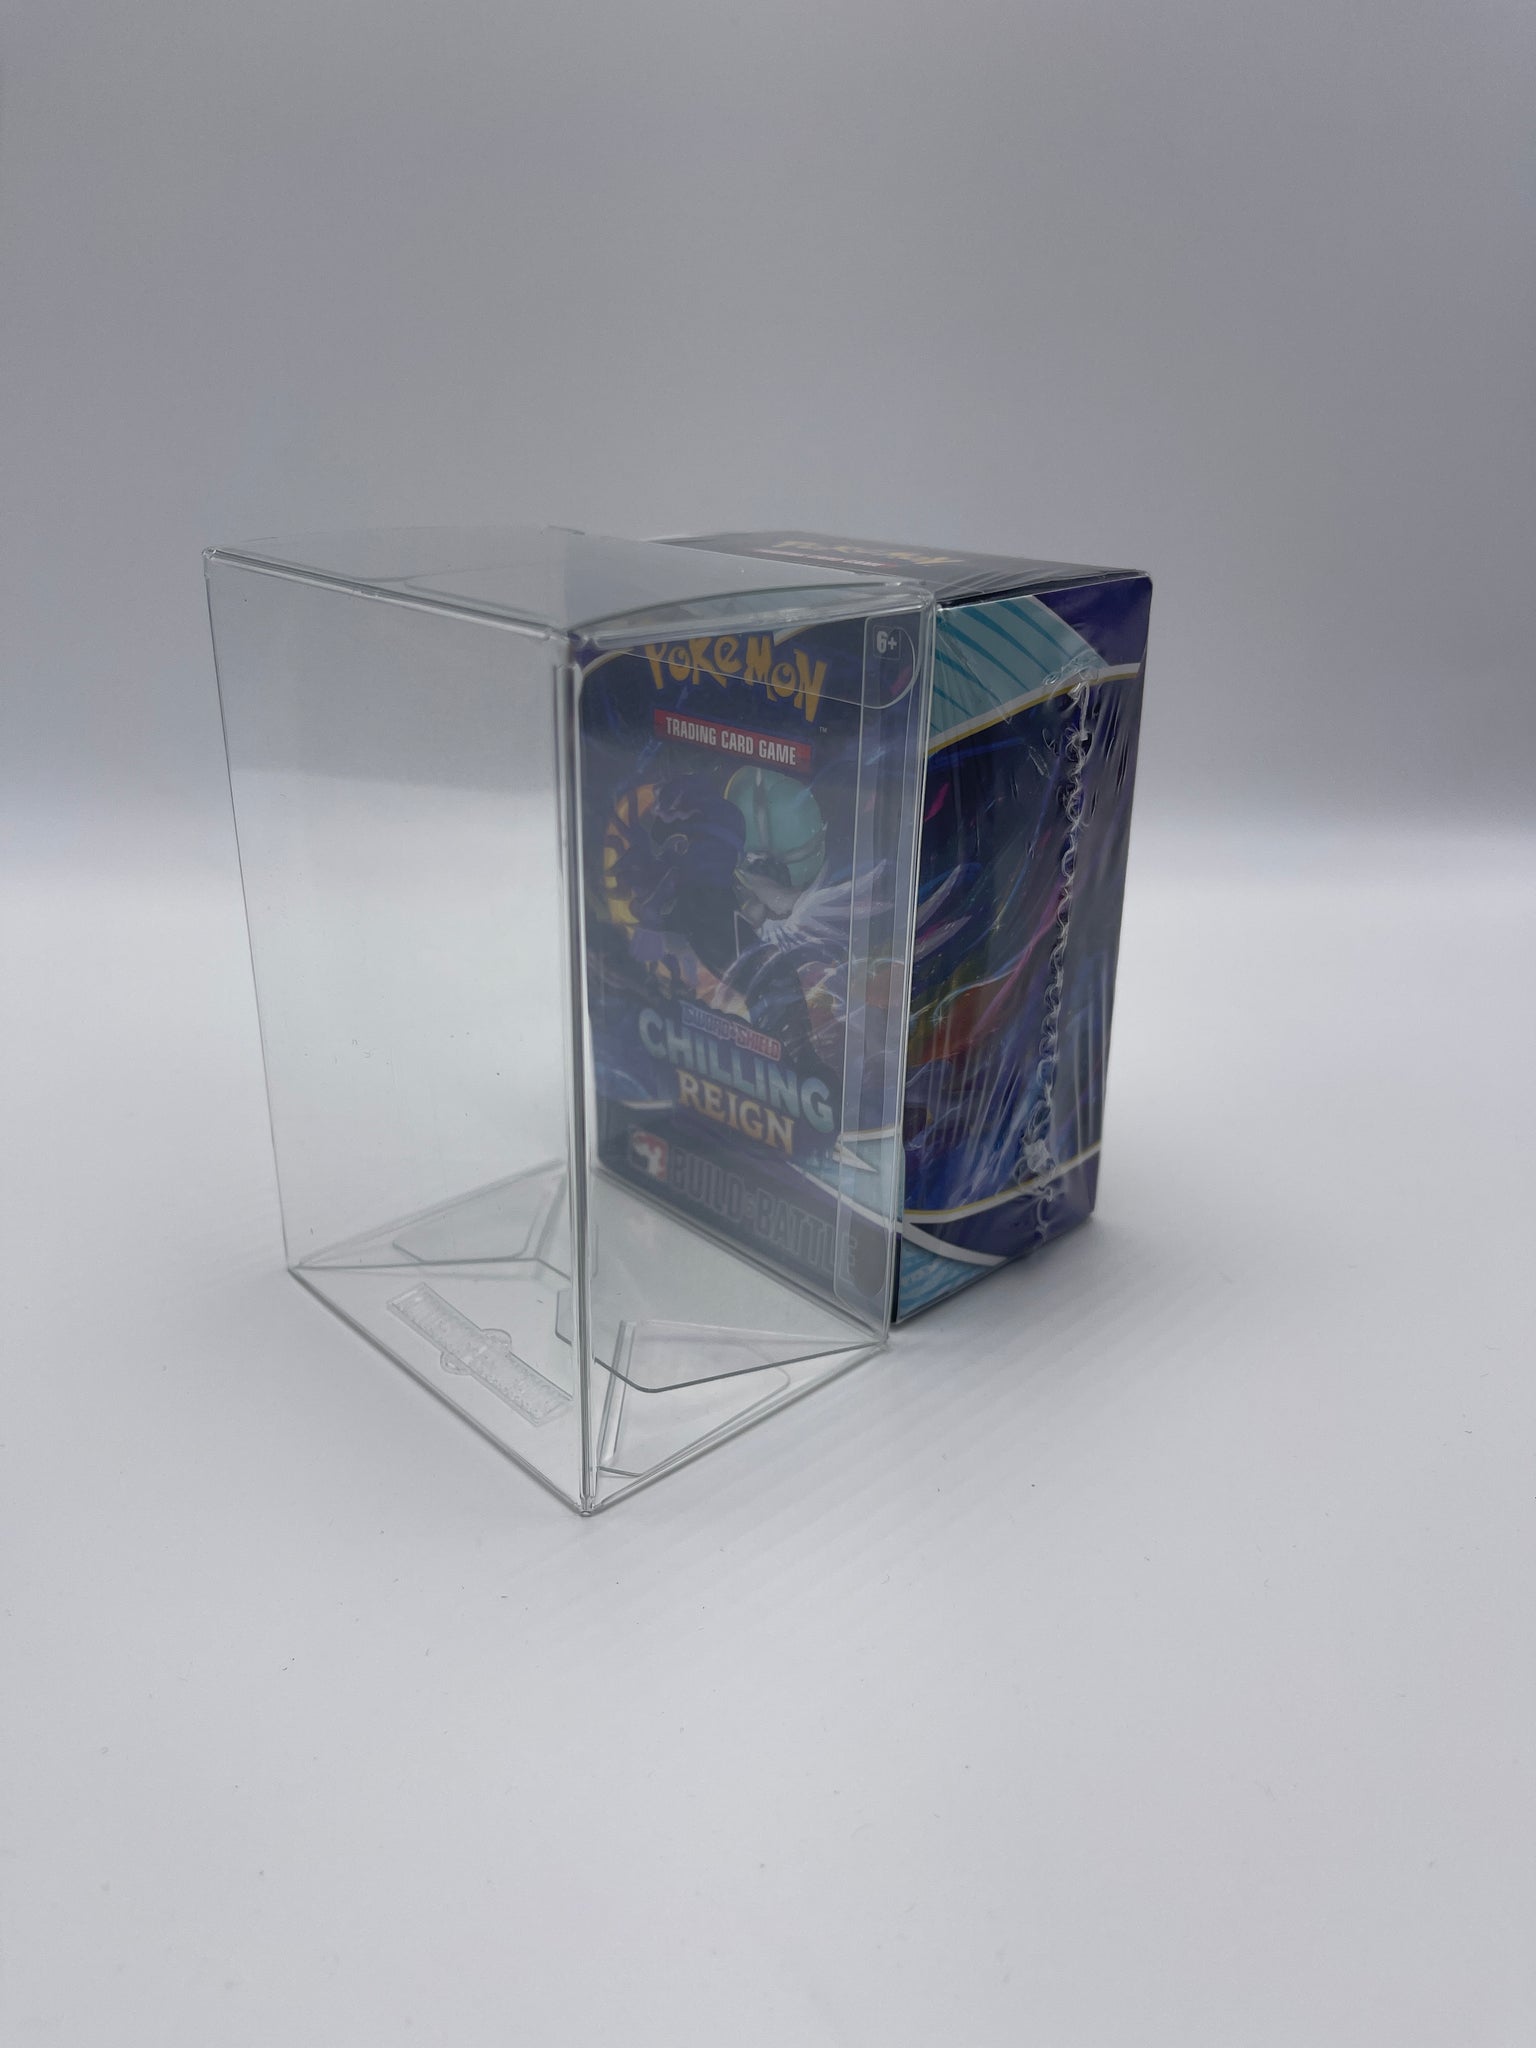 UV Protection Acrylic Plastic Display Case for Pokemon Booster